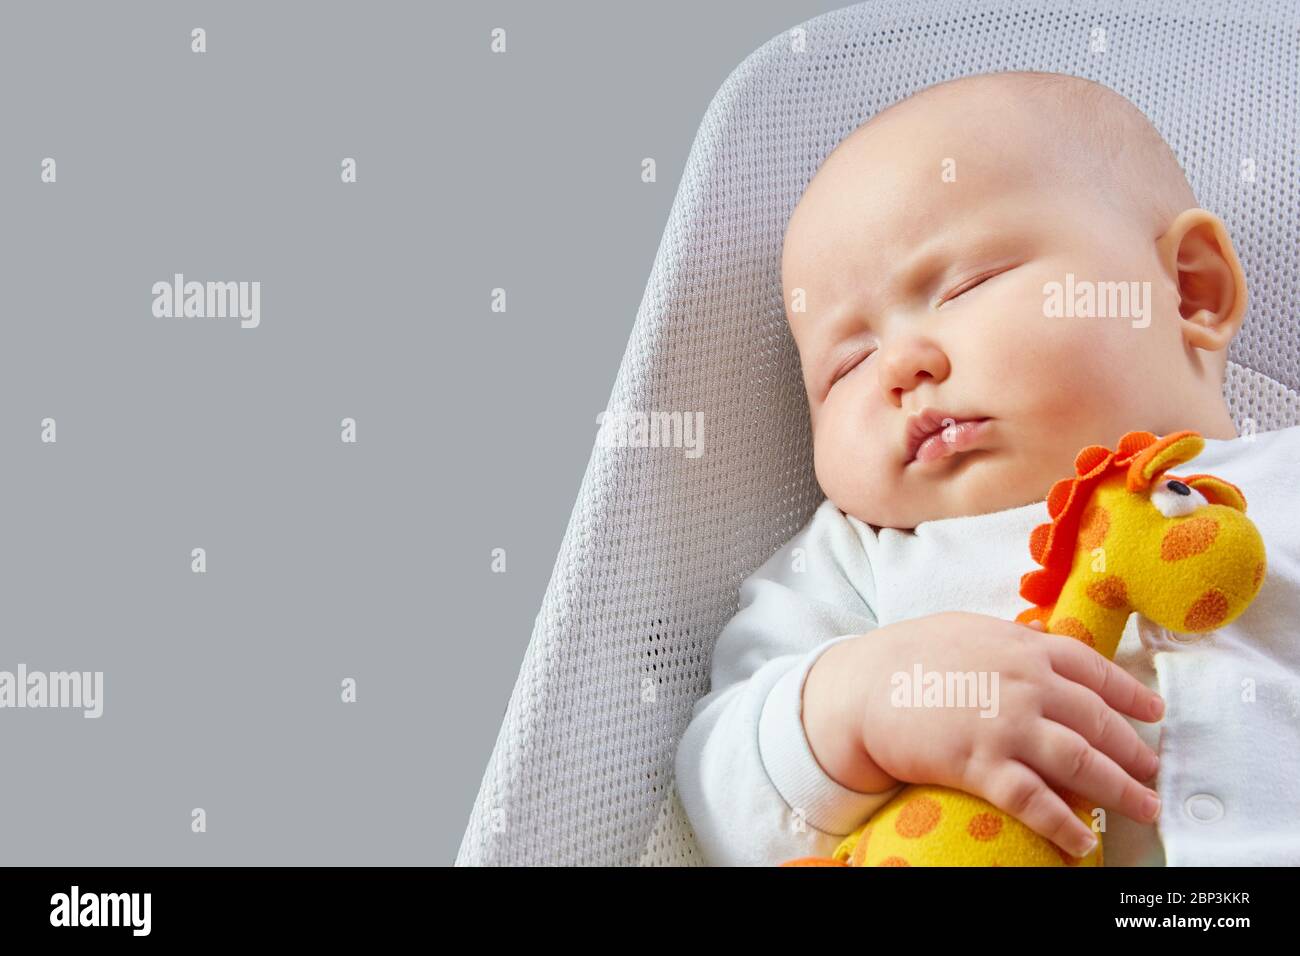 Baby sleeps with an orange toy giraffe in a deck chair on a gray background with copy space. Stock Photo